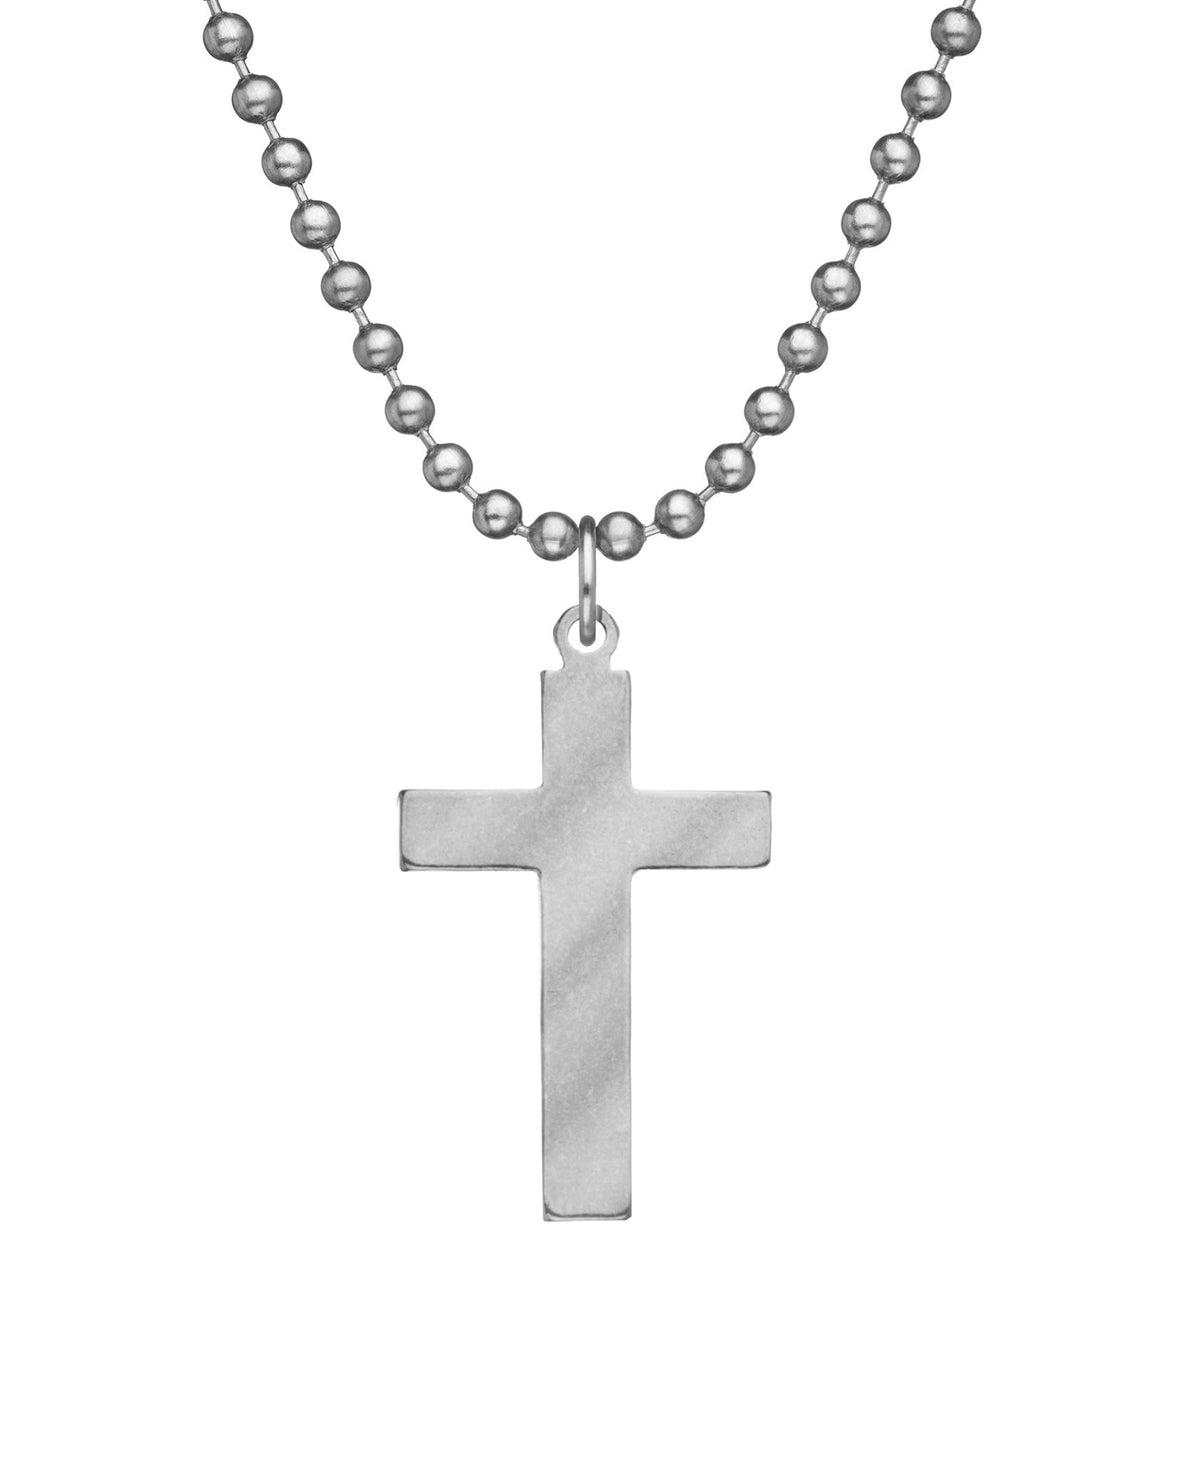 Genuine U.S. Military Issue Cross Necklace with Dog Tag Chain